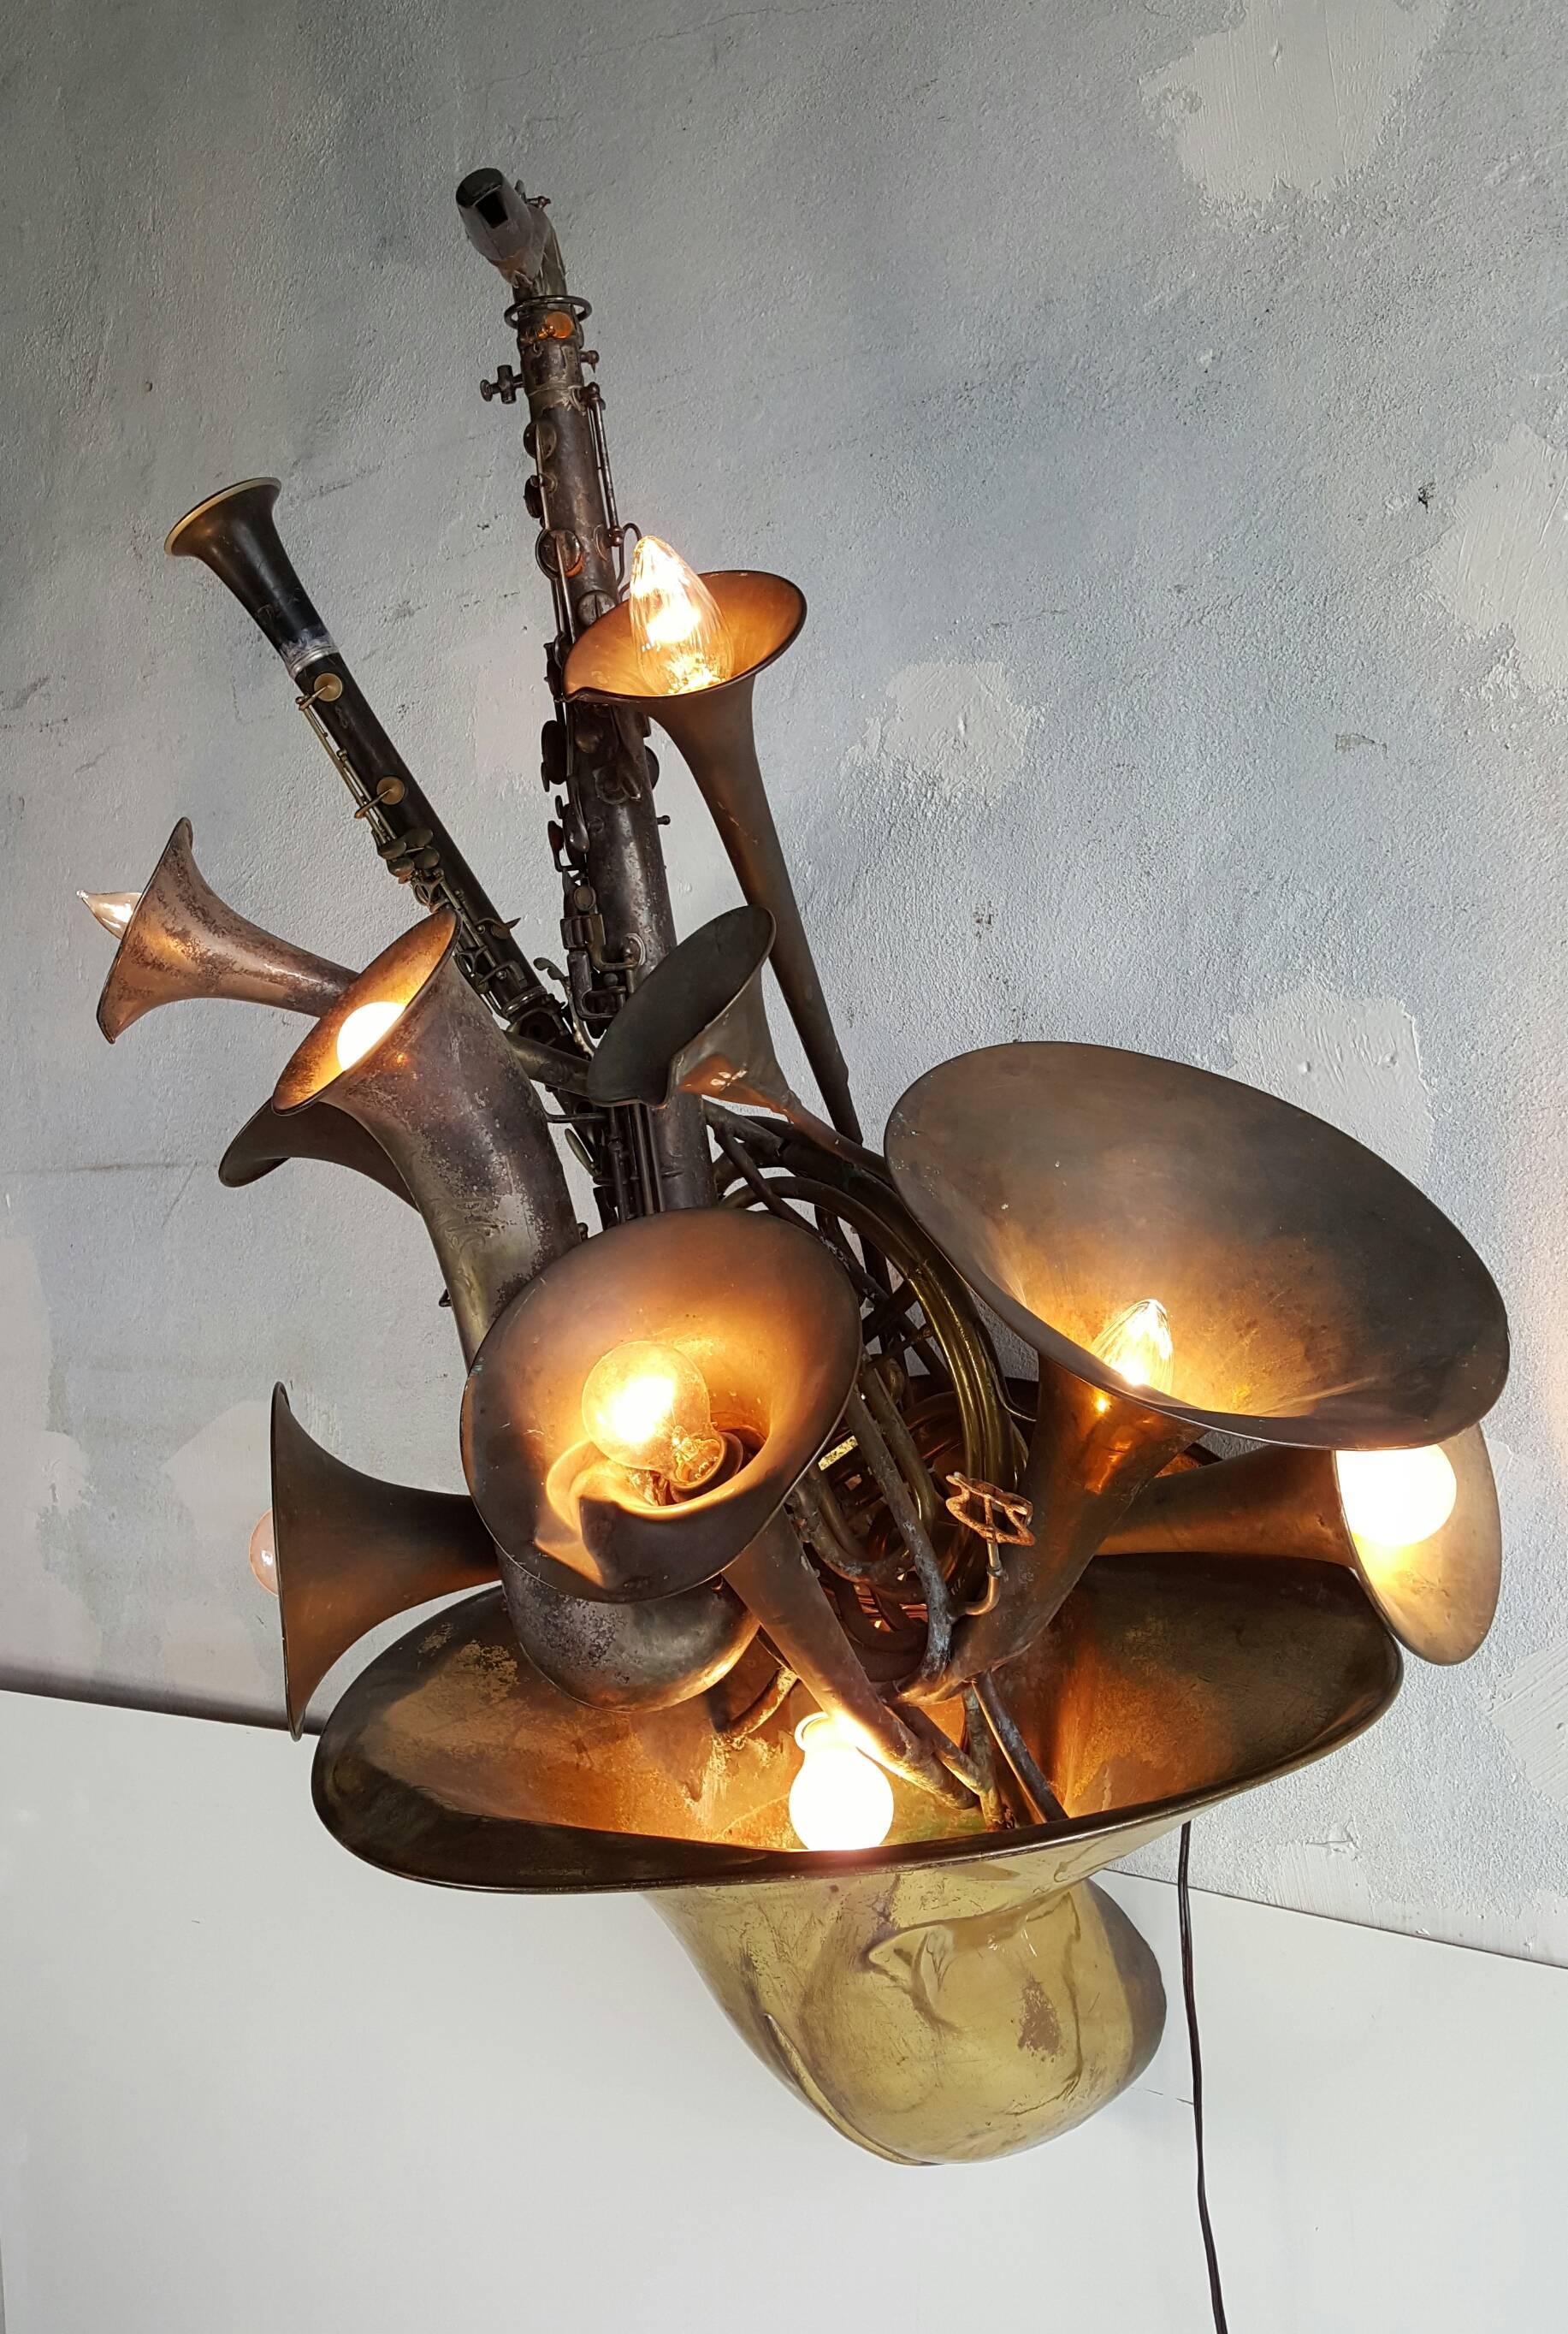 Unusual handmade multi-light wall sconce constructed of various wind instruments including saxophone, French horn, clarinet, trombone, trumpet and baritone bells. All instruments in antique original condition, signs of wear and tear, adds to the